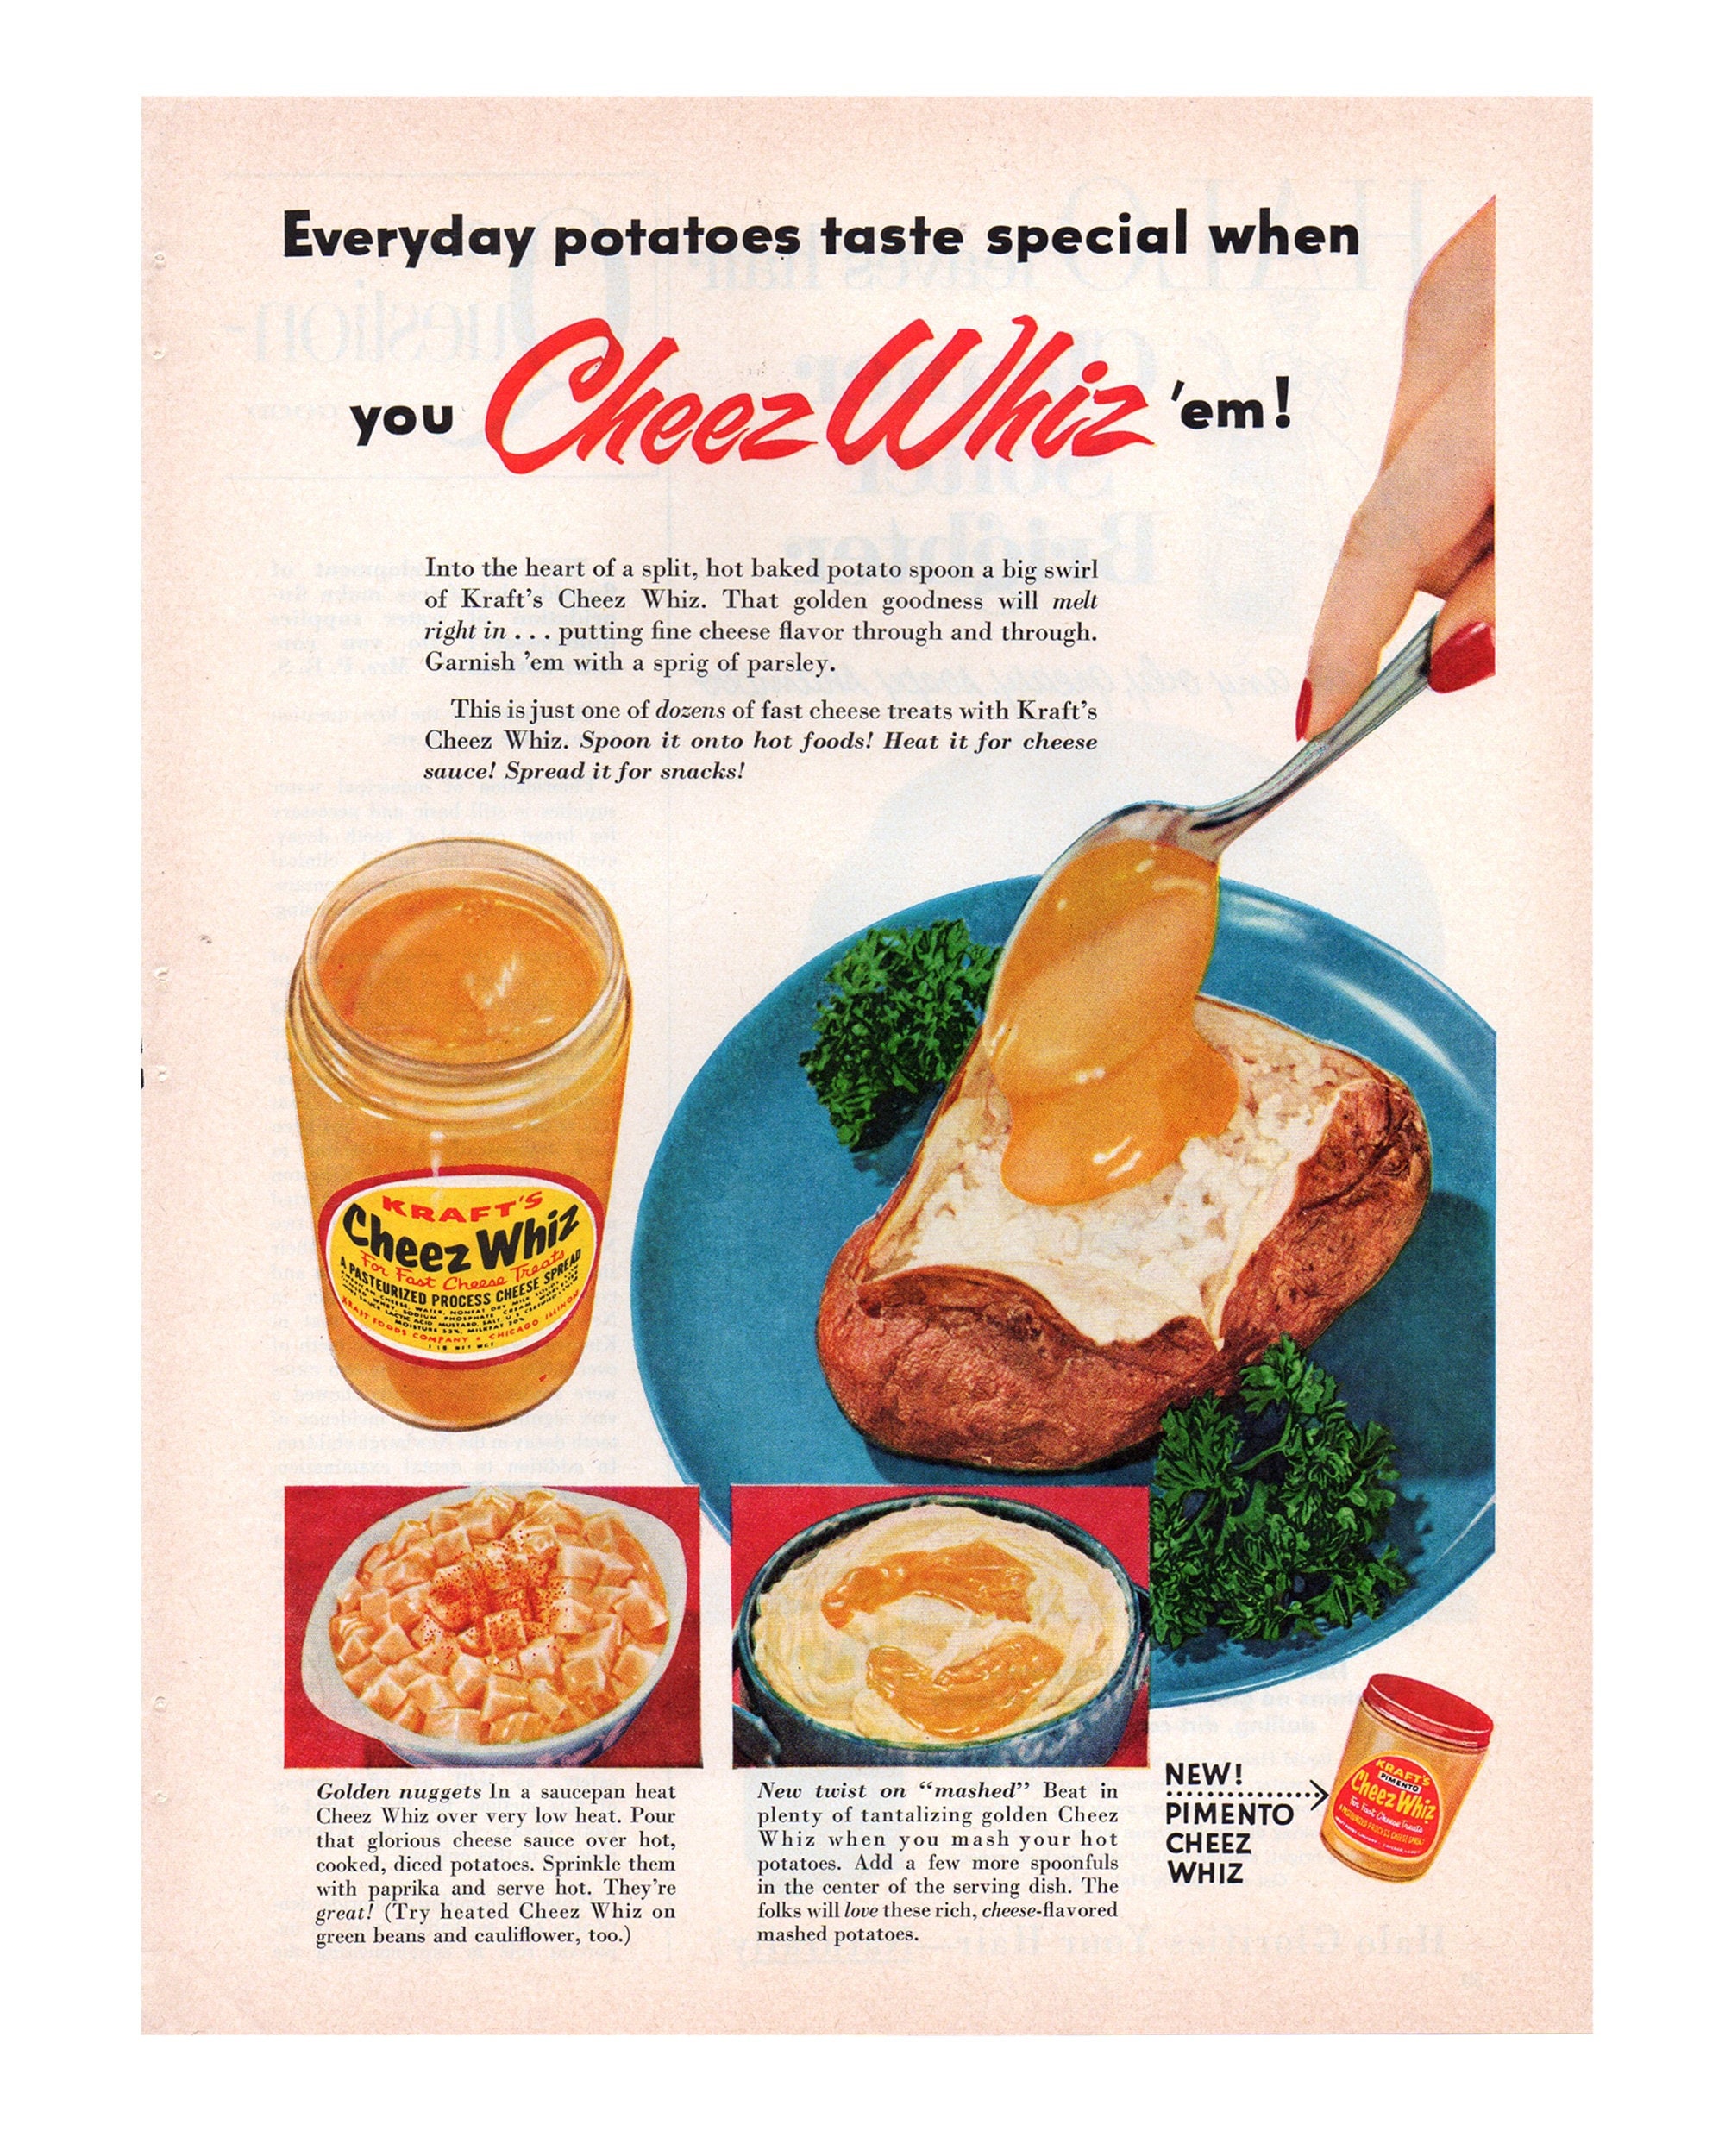 The Not-So-American History of Cheez Whiz